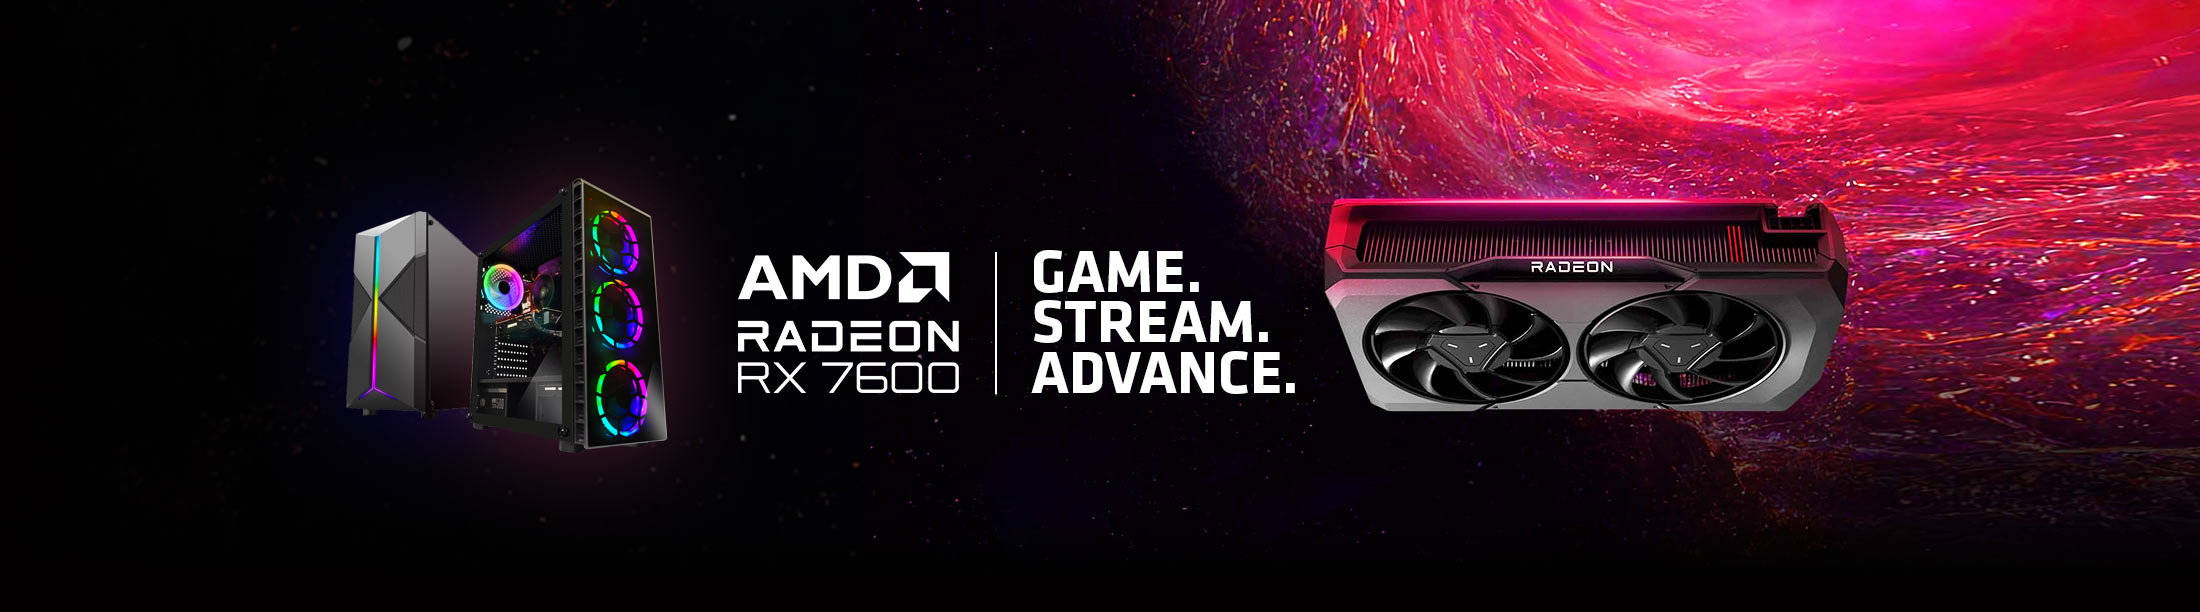 Game.Stream.Advance. Breakthrough Performance with AMD Radeon RX 7600 PCs at MESH